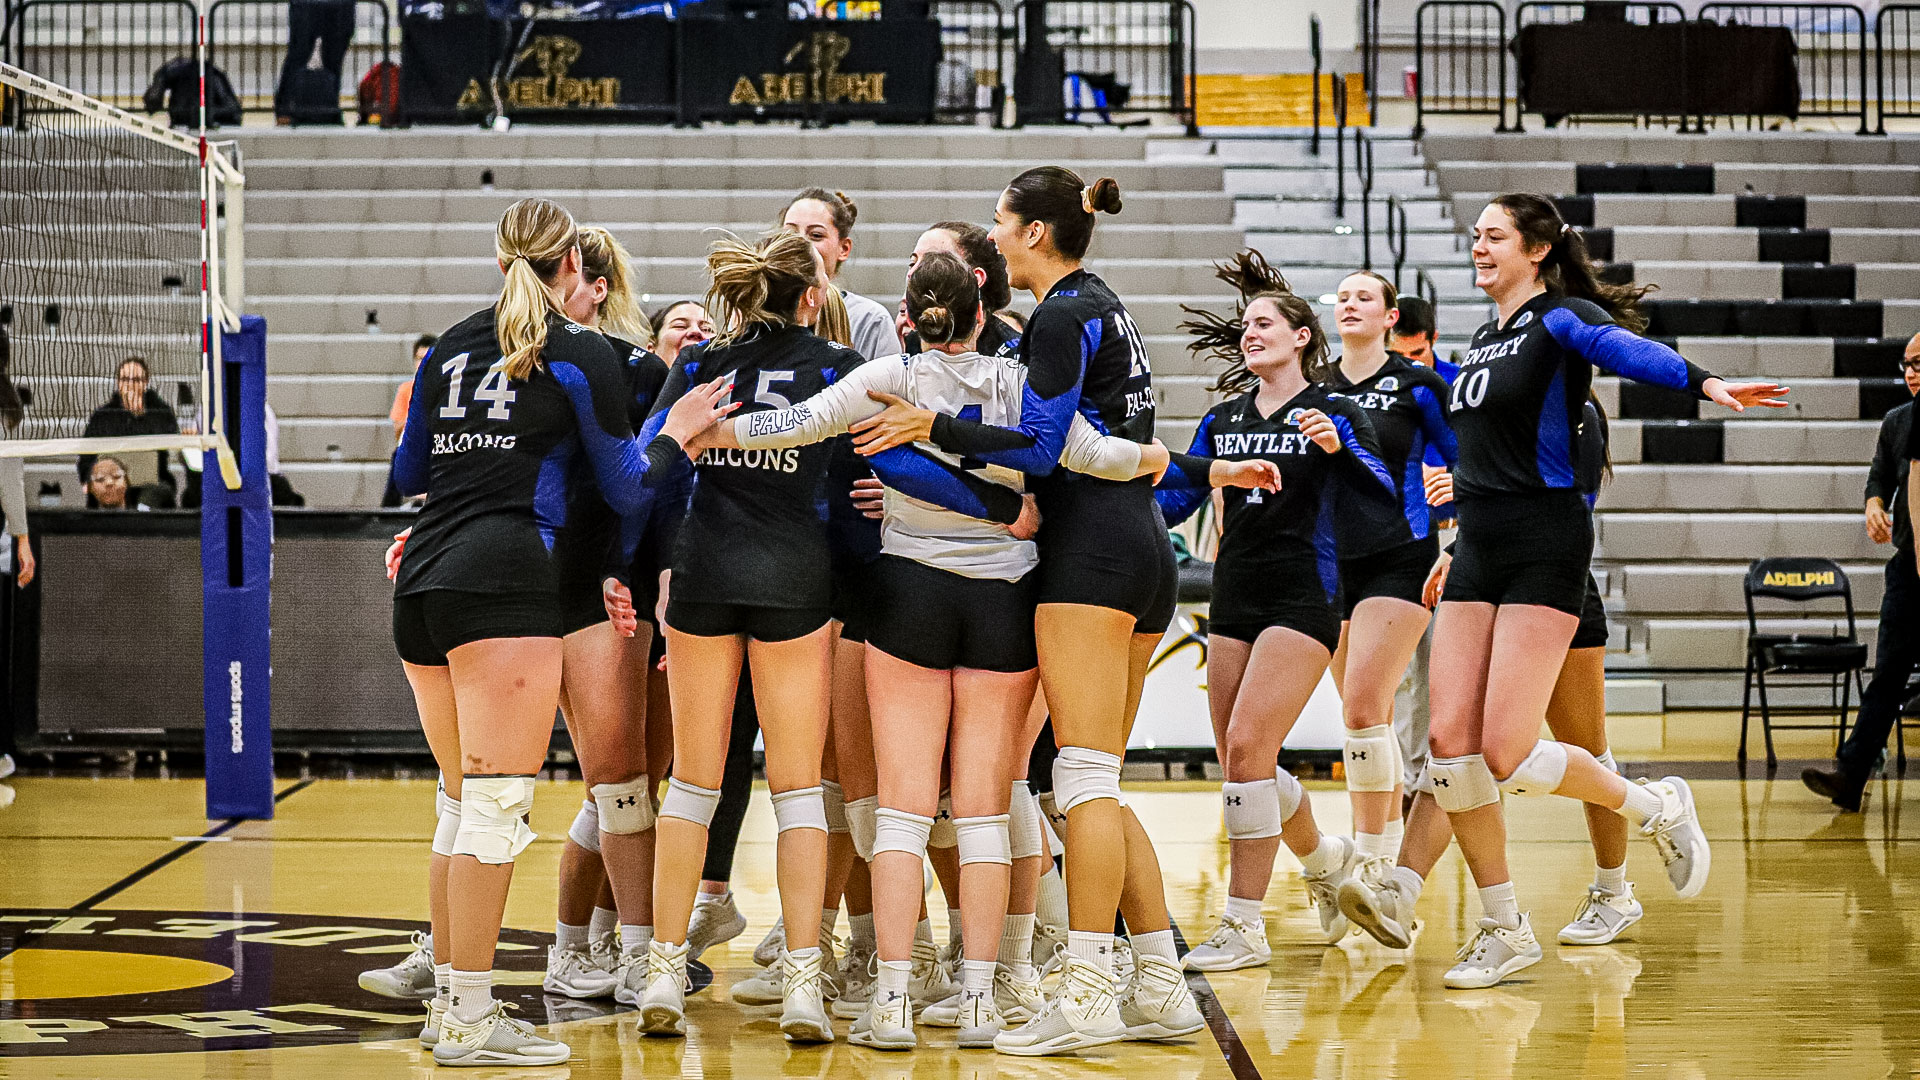 Falcons advance! Bentley takes down SNHU in five sets